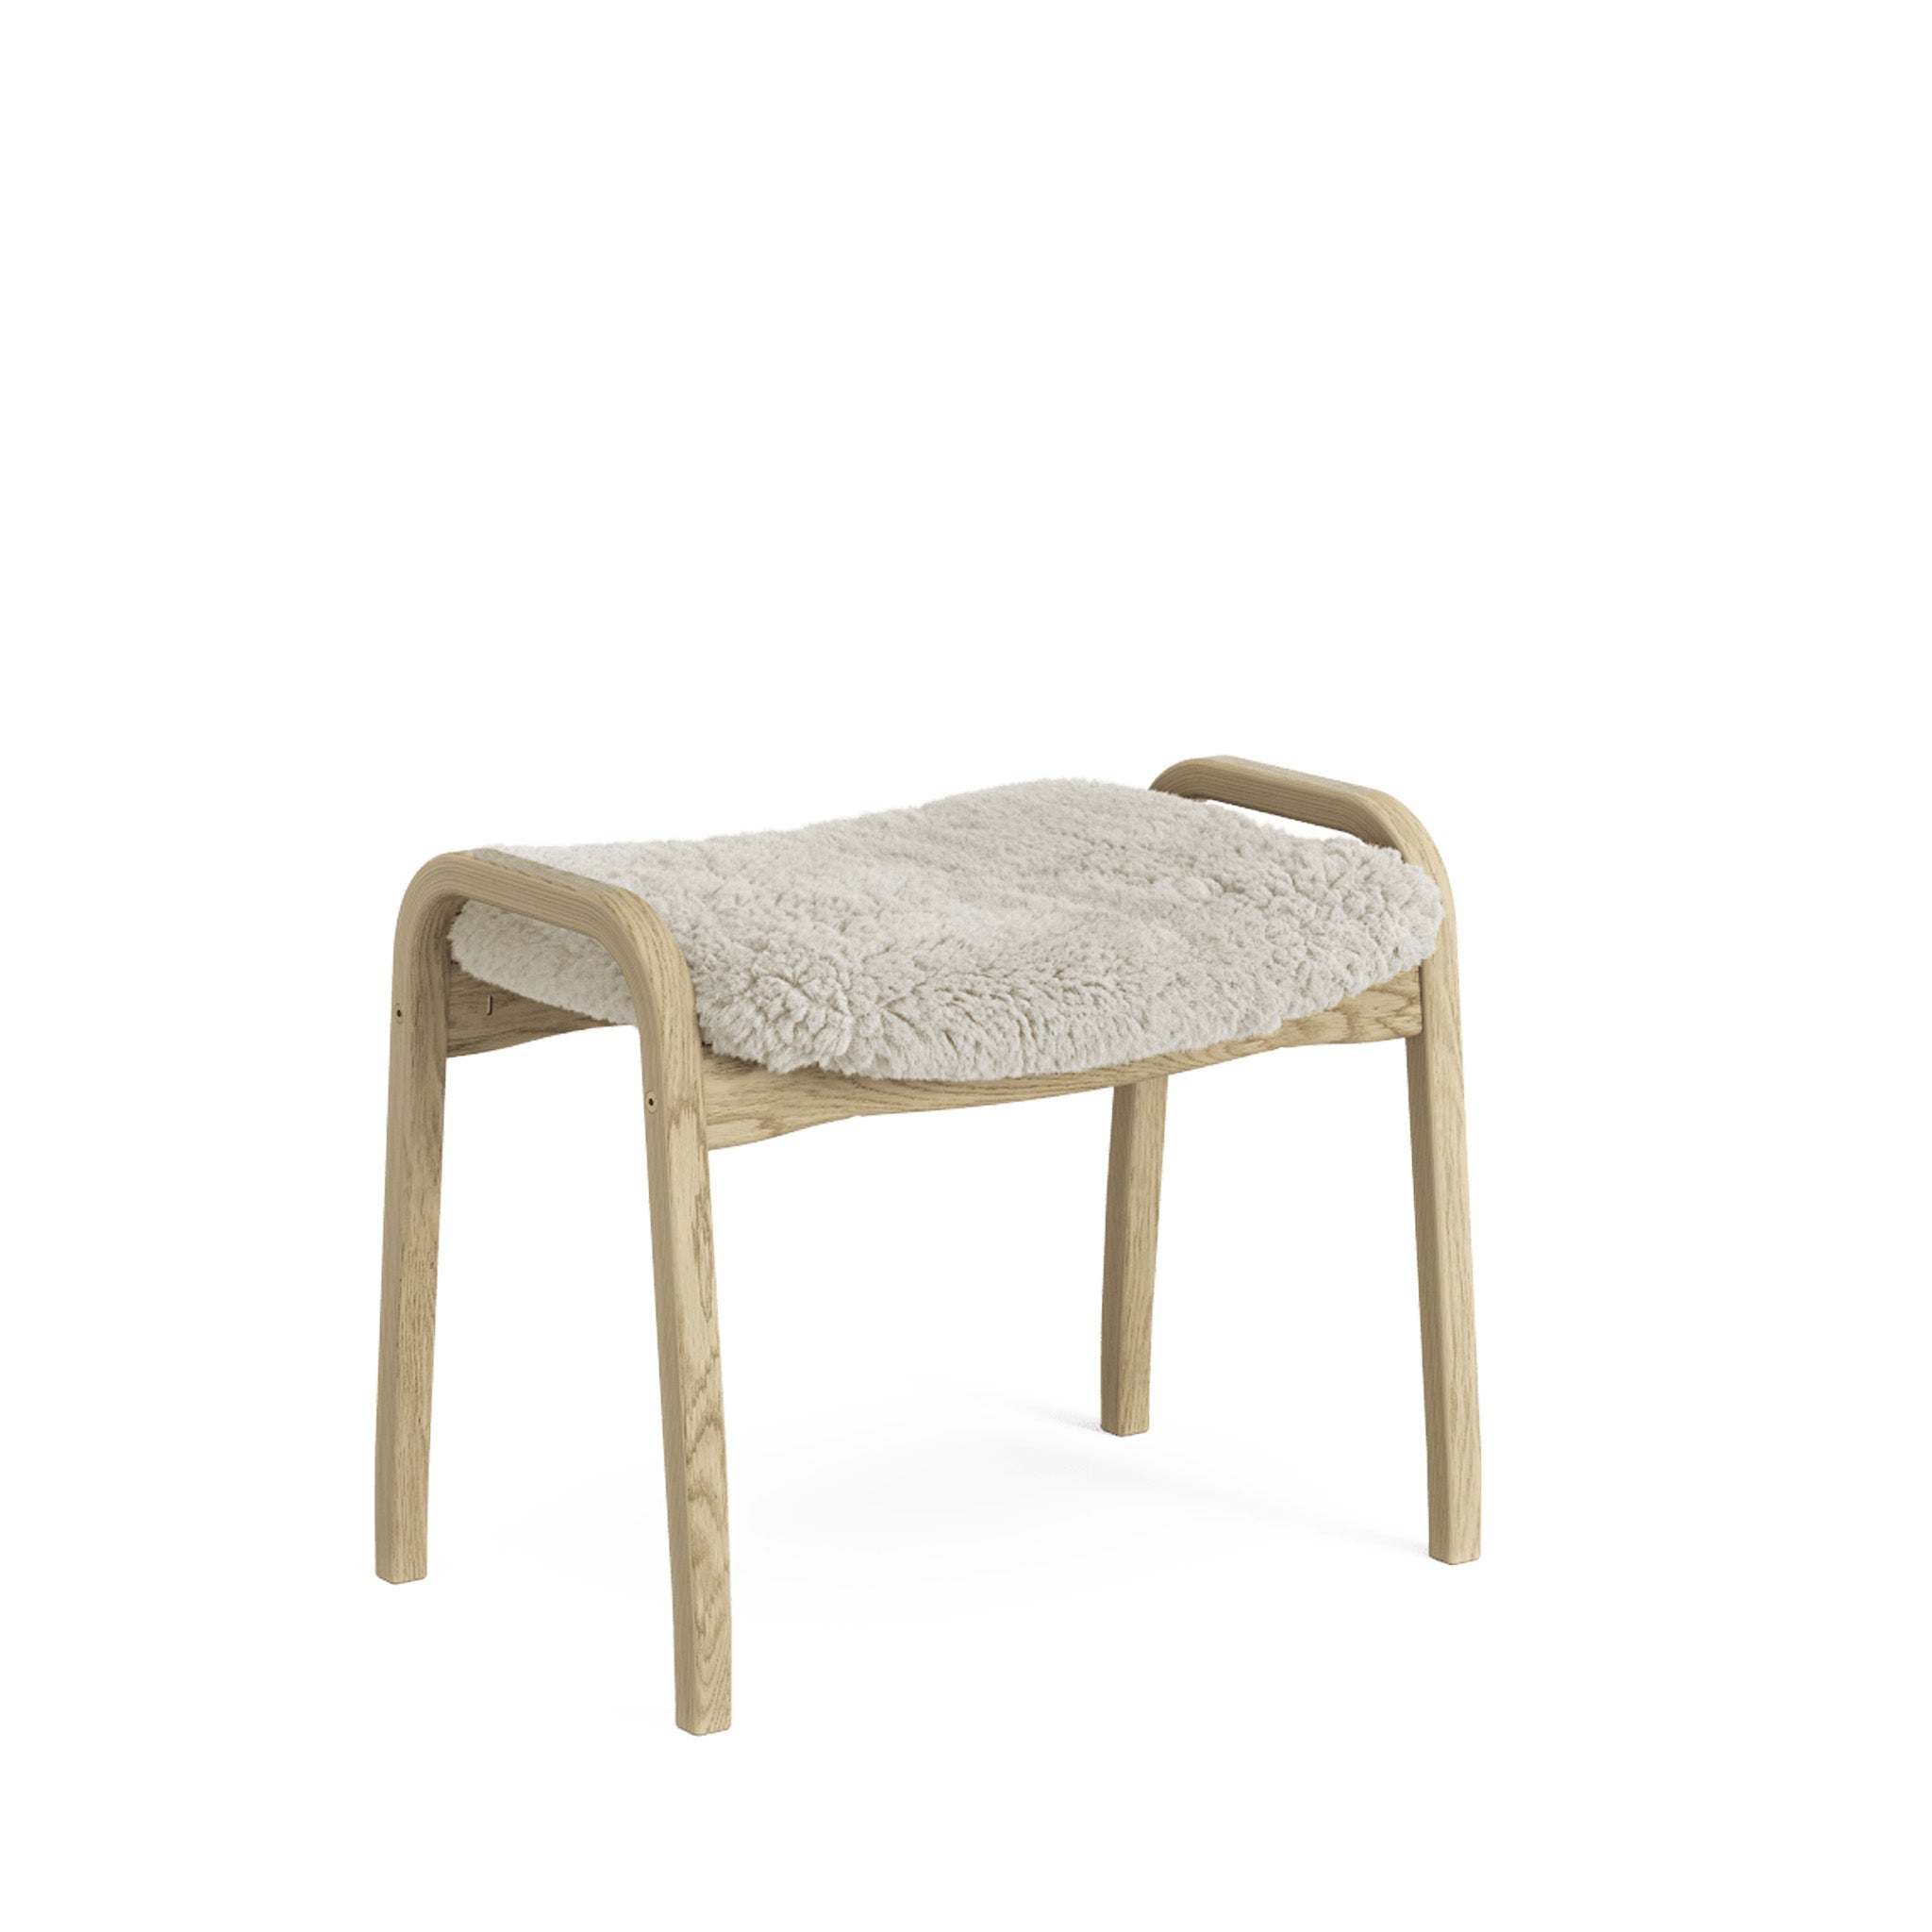 Lamini Children's Footstool by Swedese